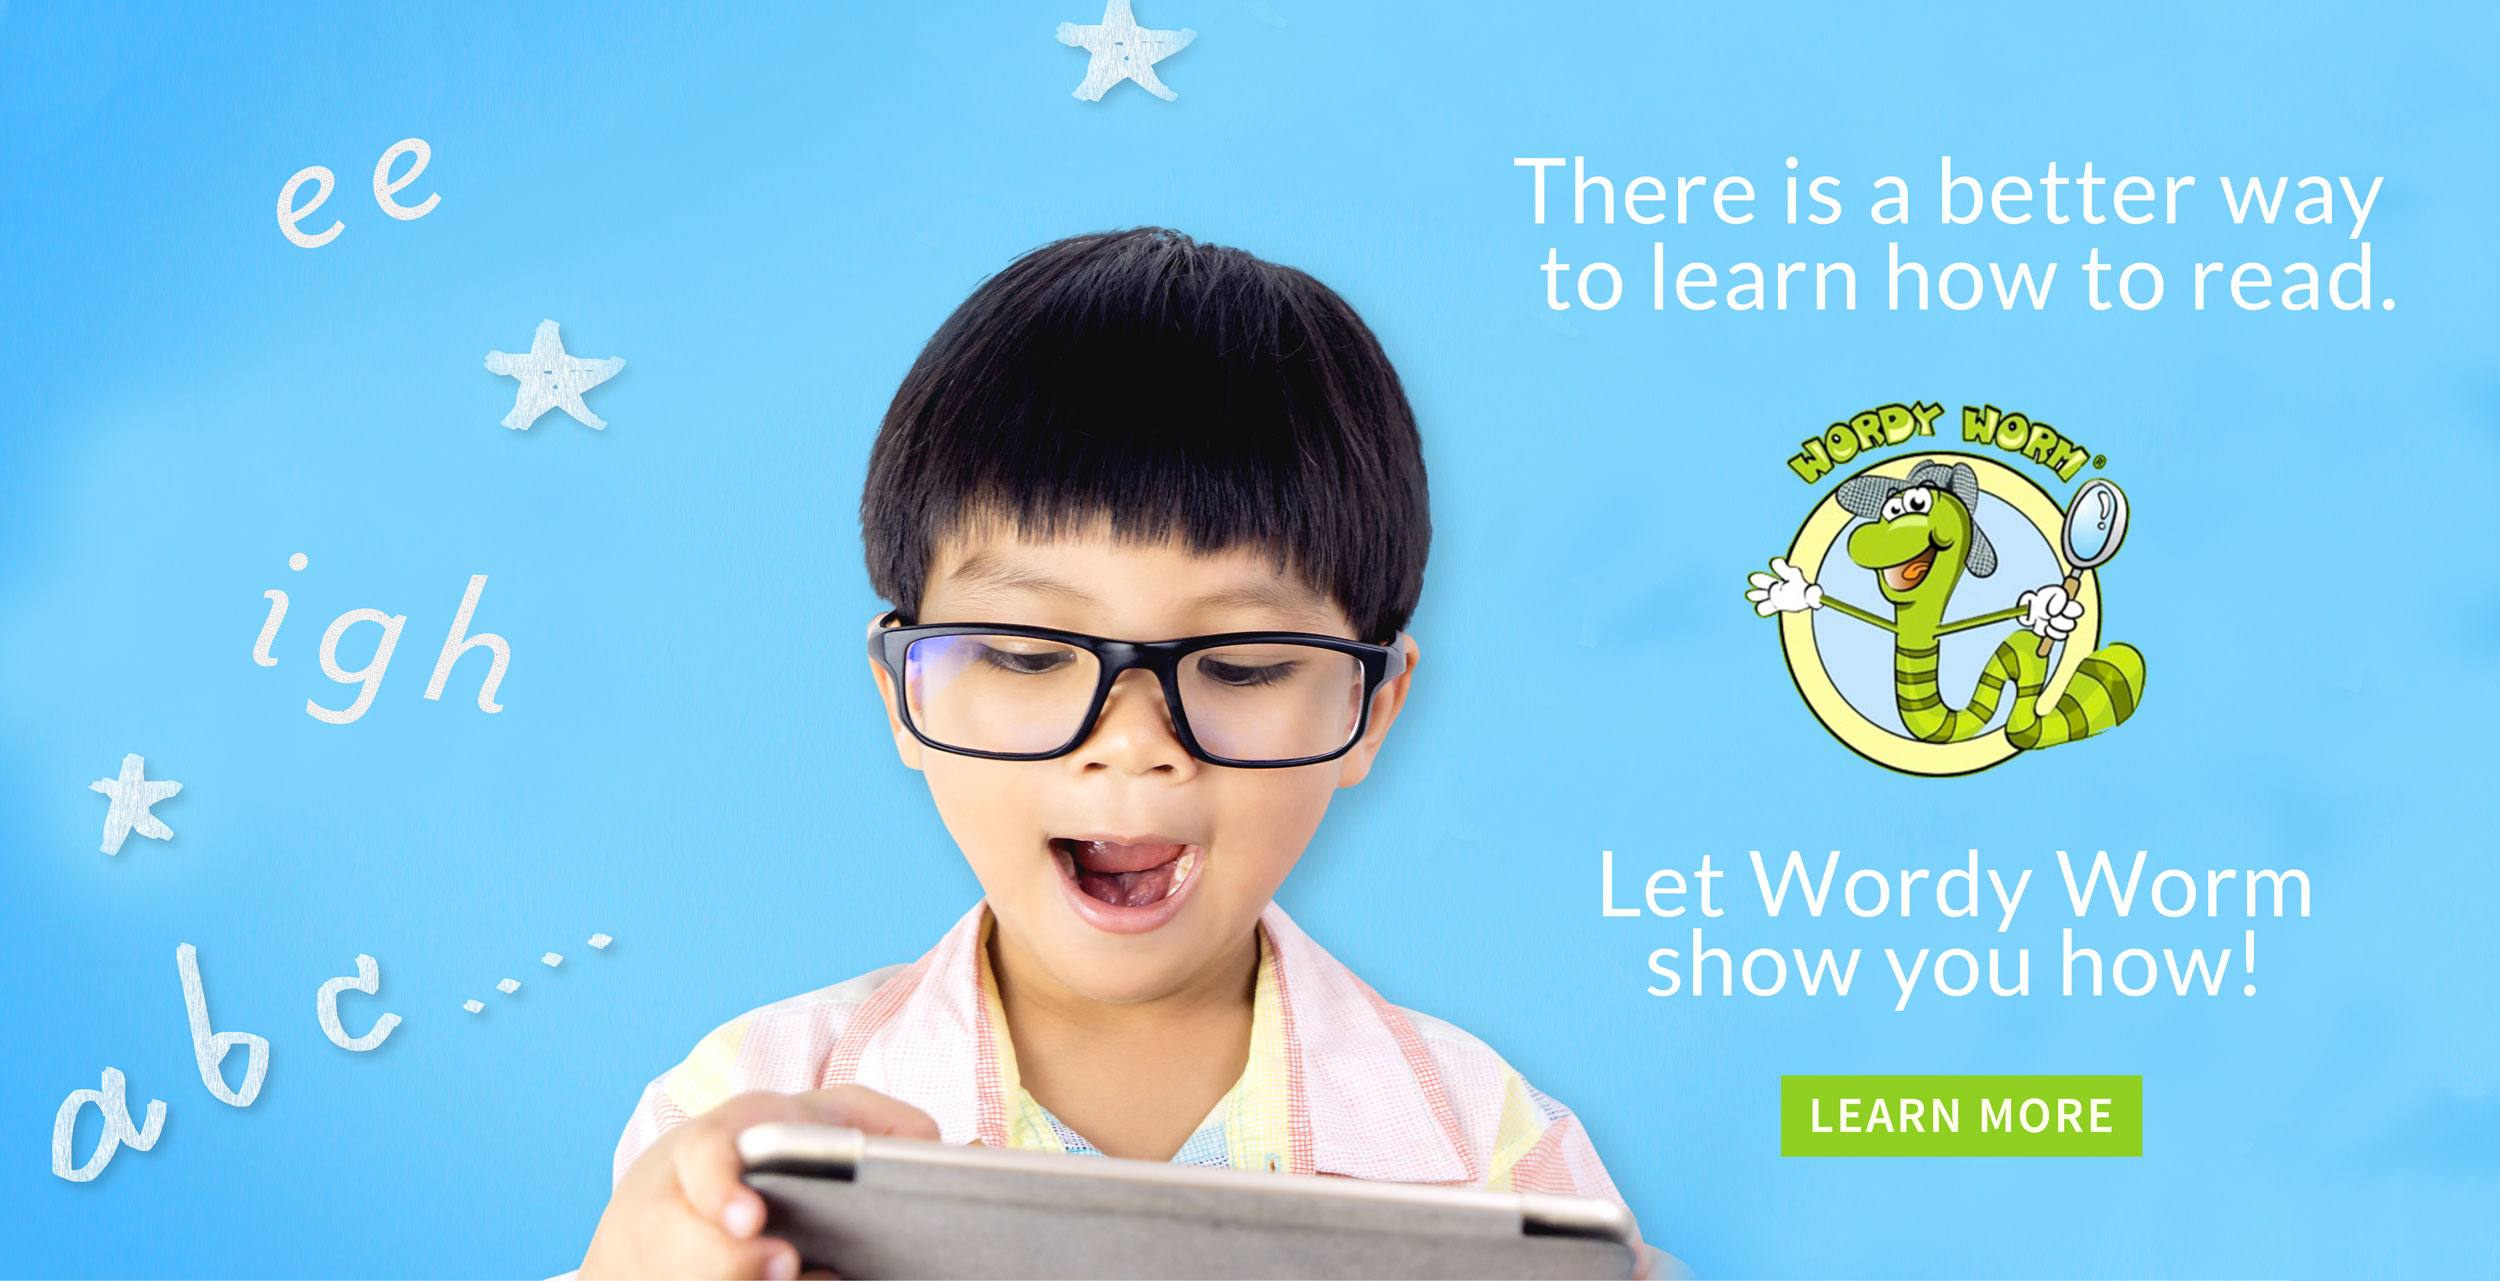 There is a better way to learn how to read with this phonics reading program. Let Wordy Worm show you how!